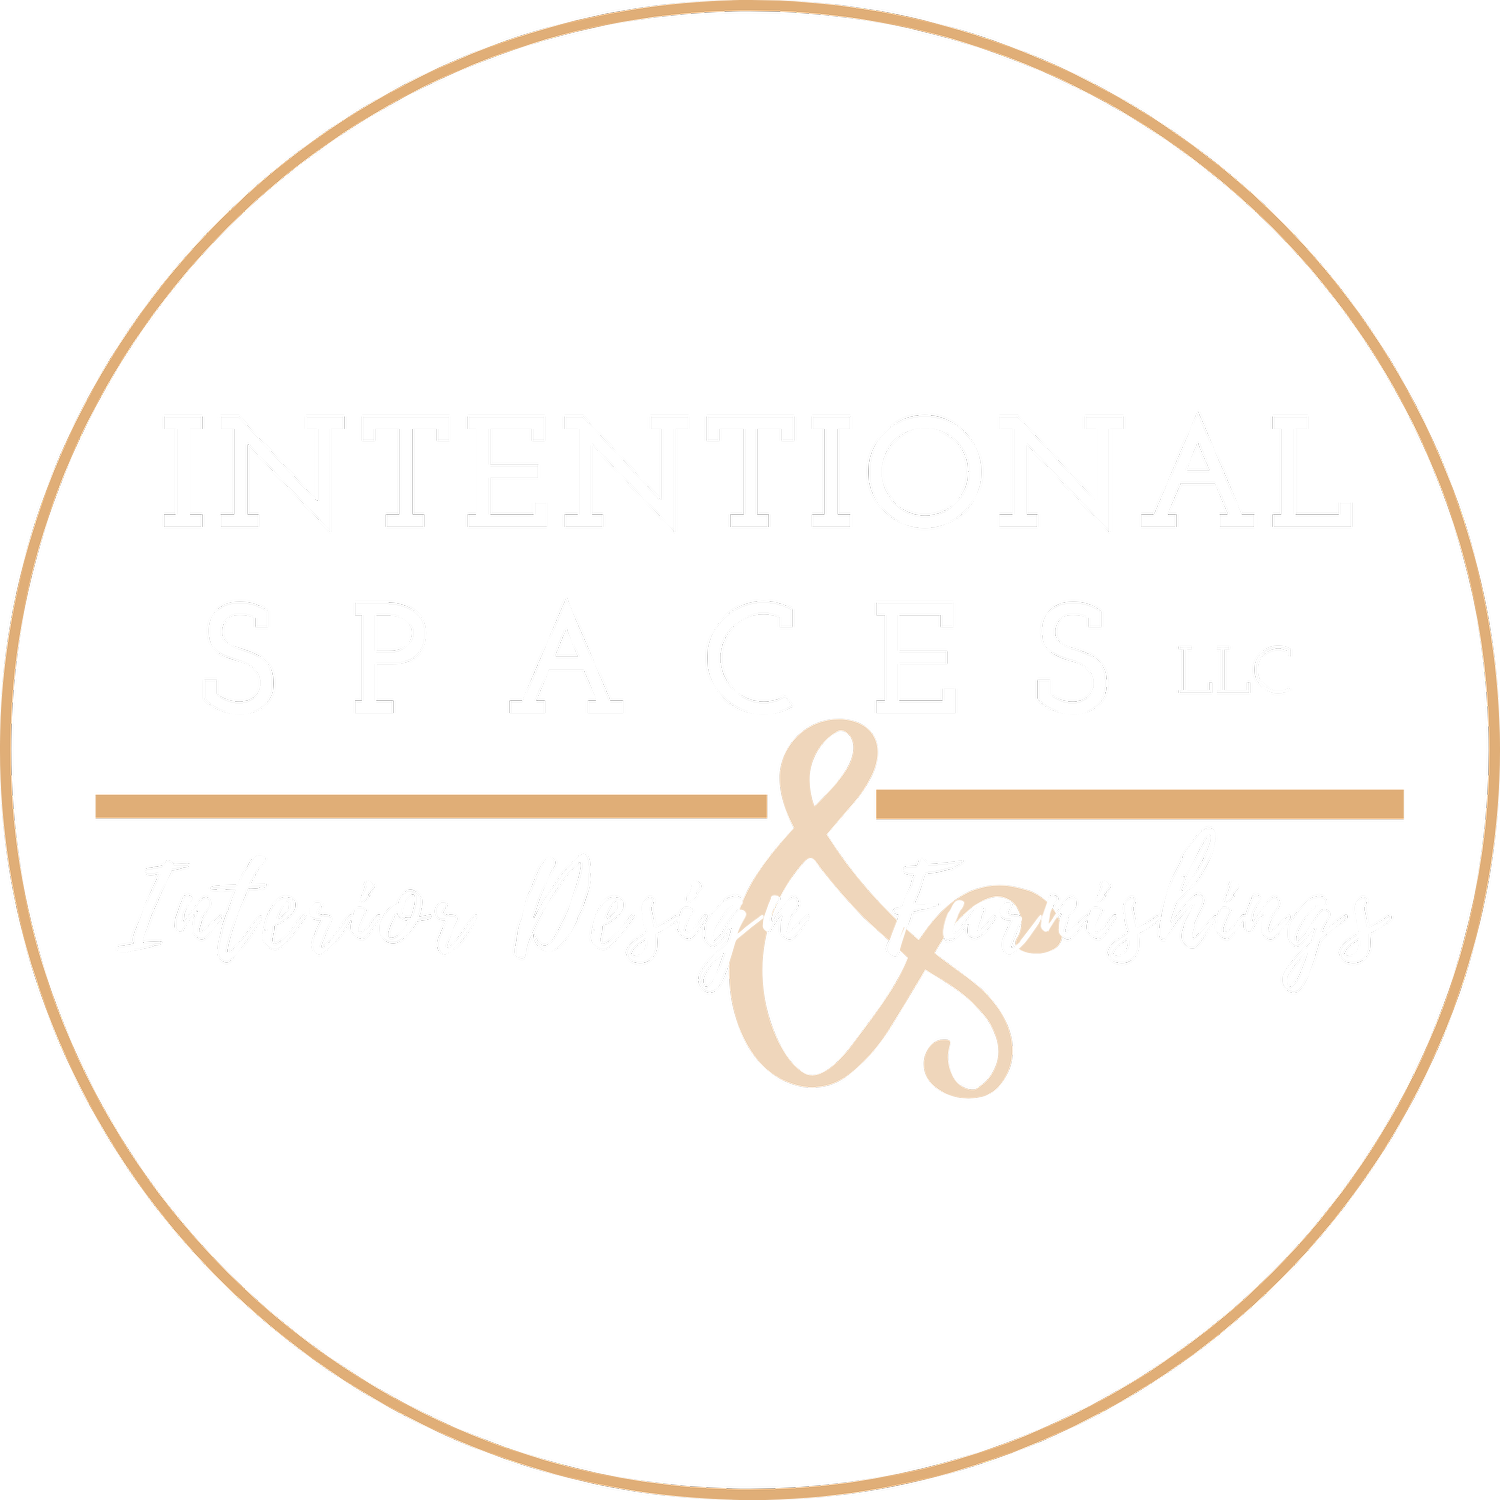 Intentional Spaces LLC